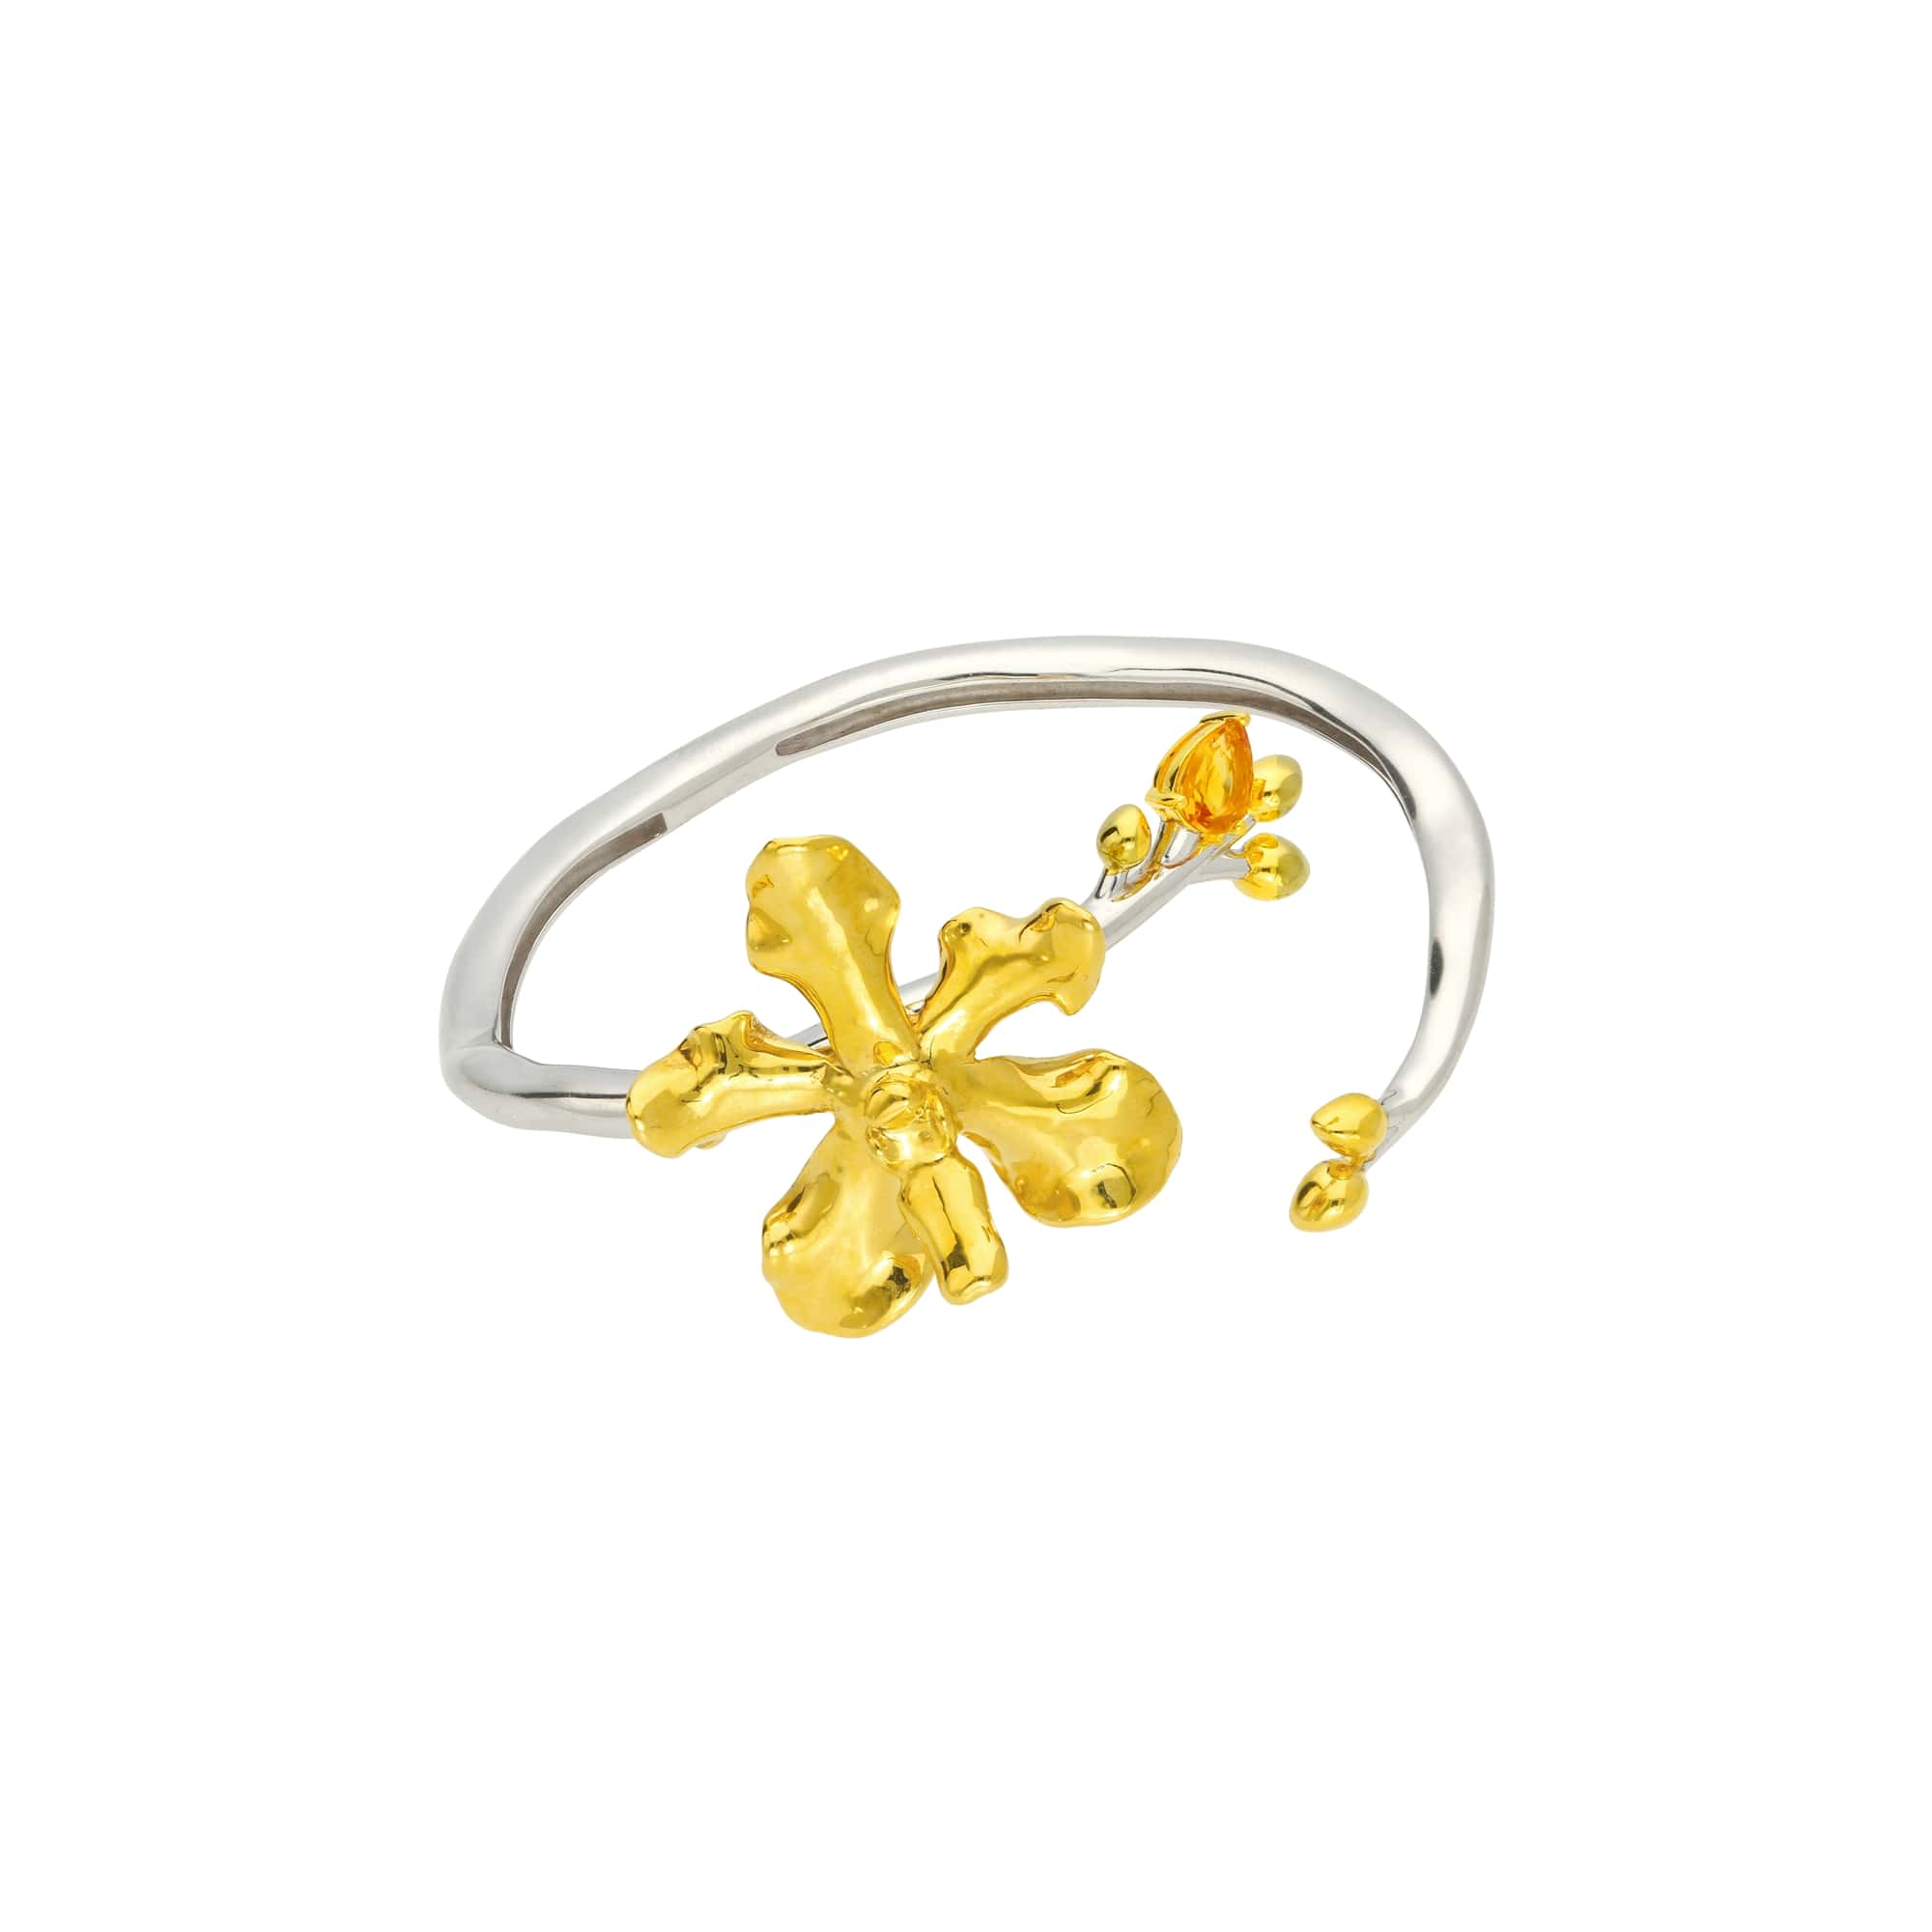 Orchid Spiral Bangle